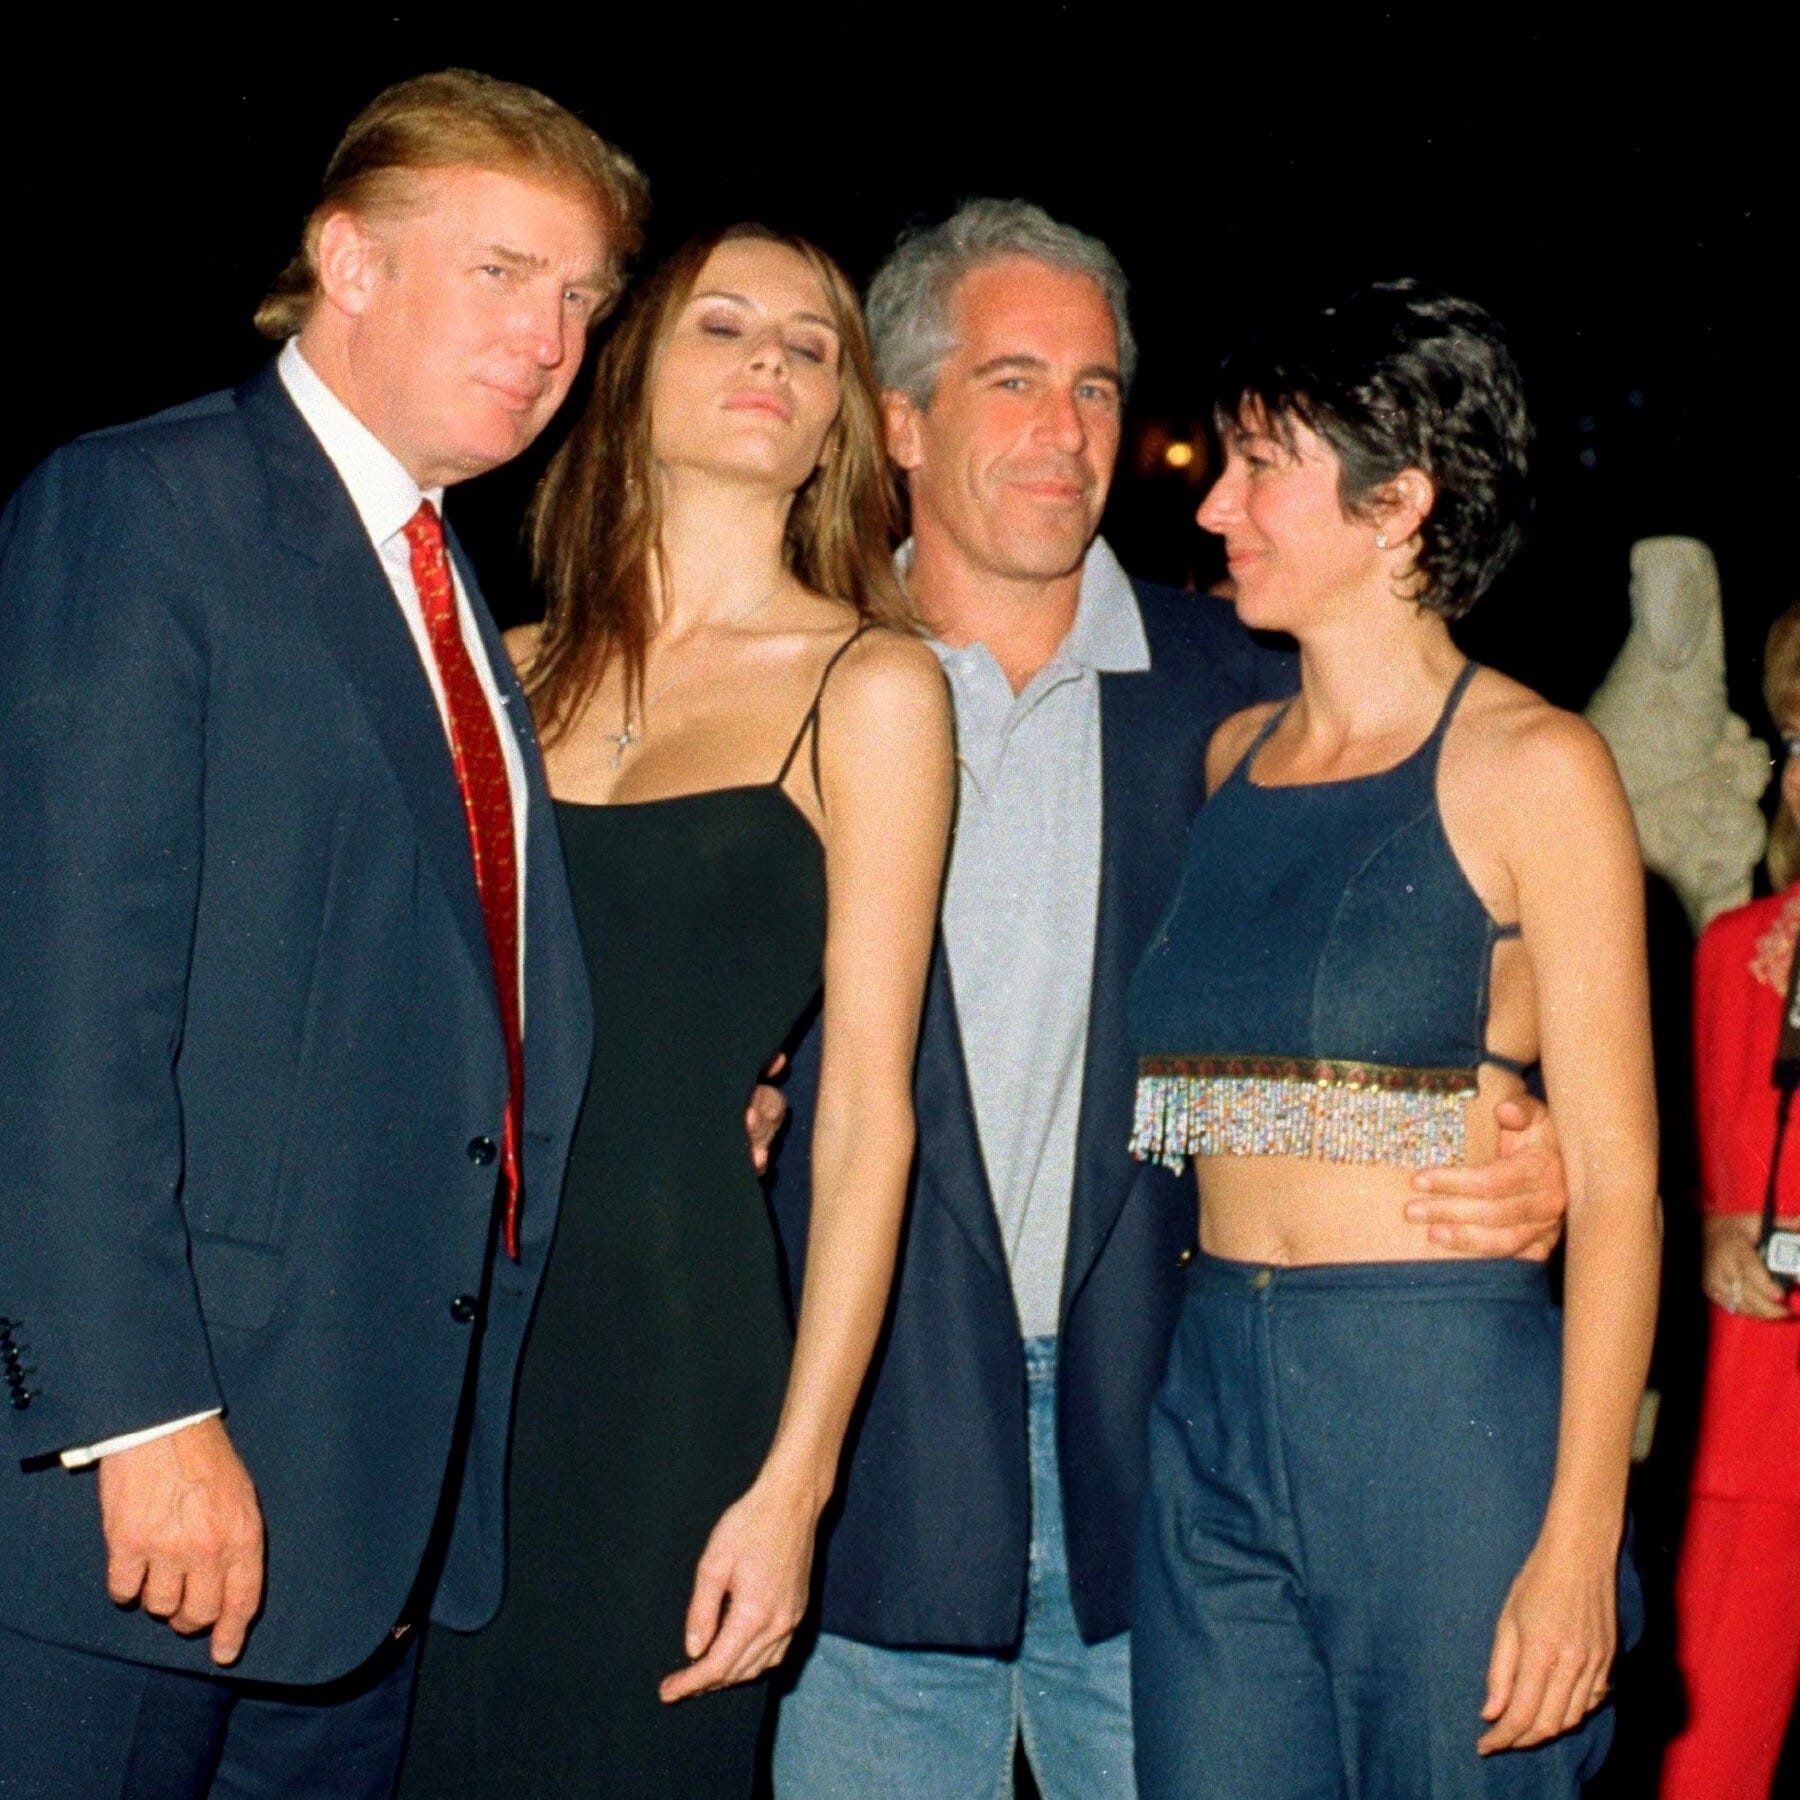 Donald Trump a regular client of Jeffrey Epstein’s ‘Massage’ services, According to Leaked Memo